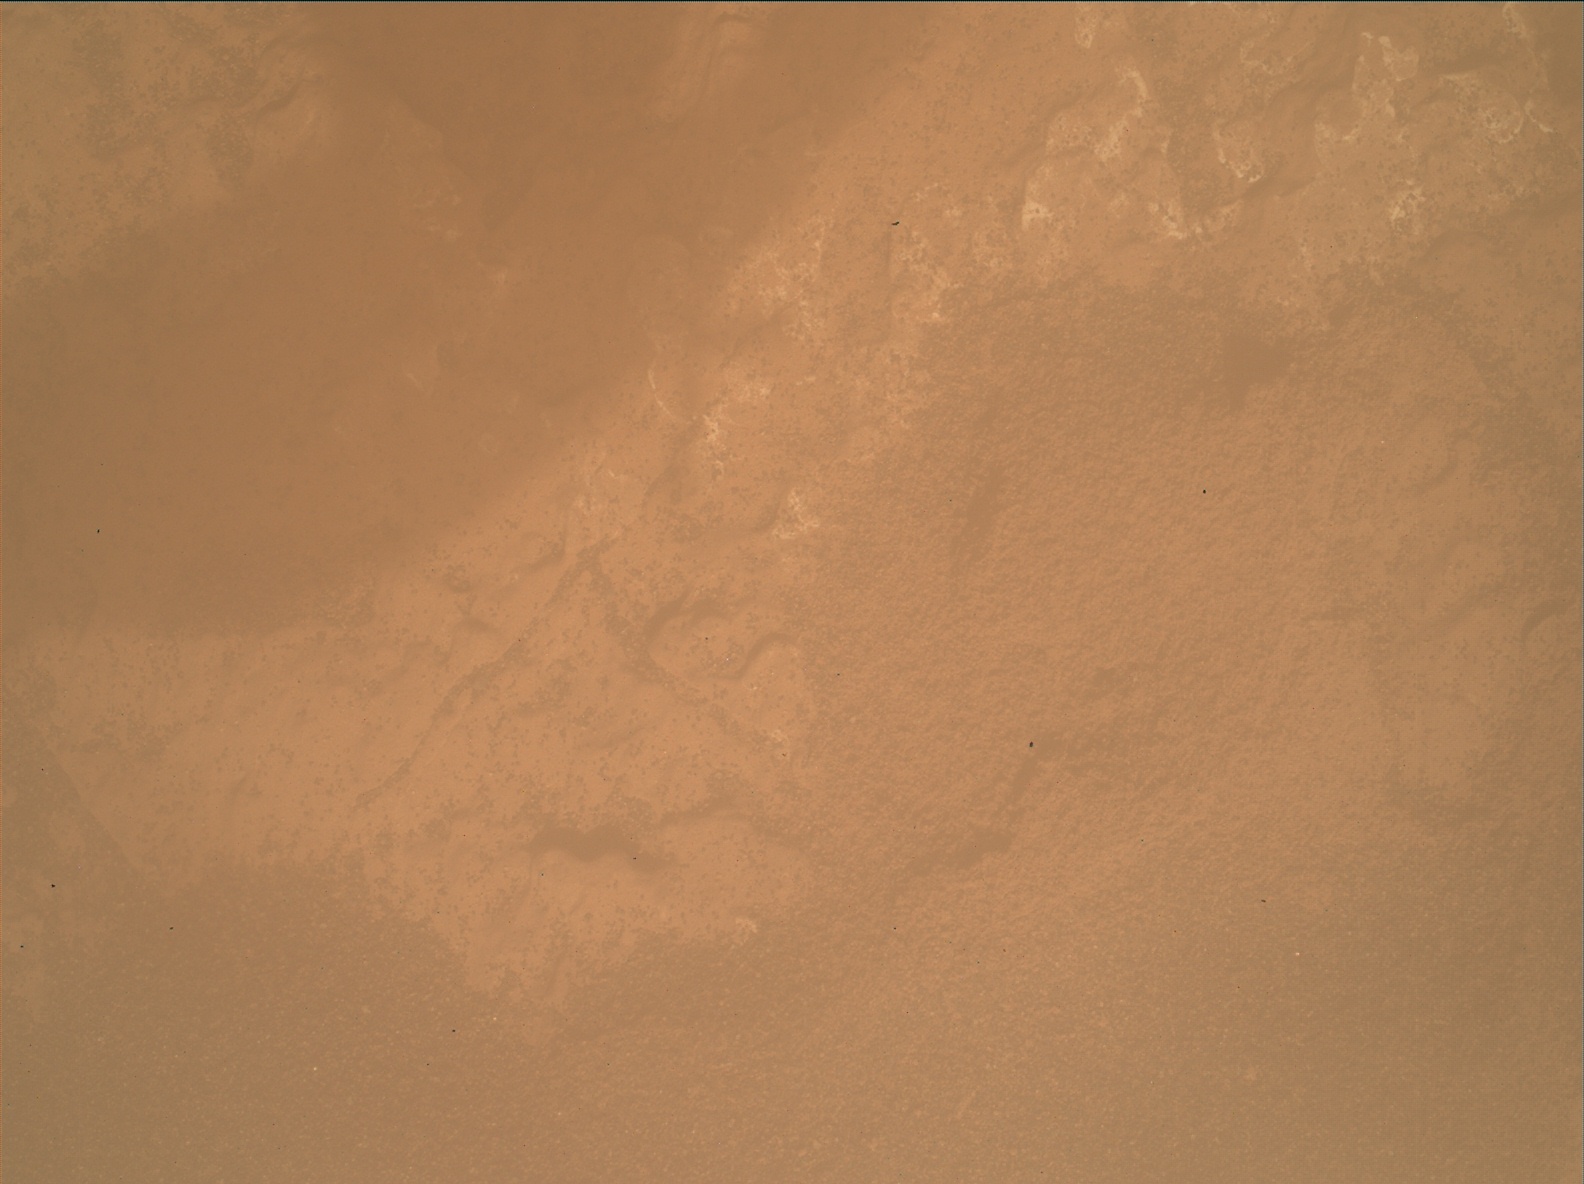 Nasa's Mars rover Curiosity acquired this image using its Mars Hand Lens Imager (MAHLI) on Sol 1534